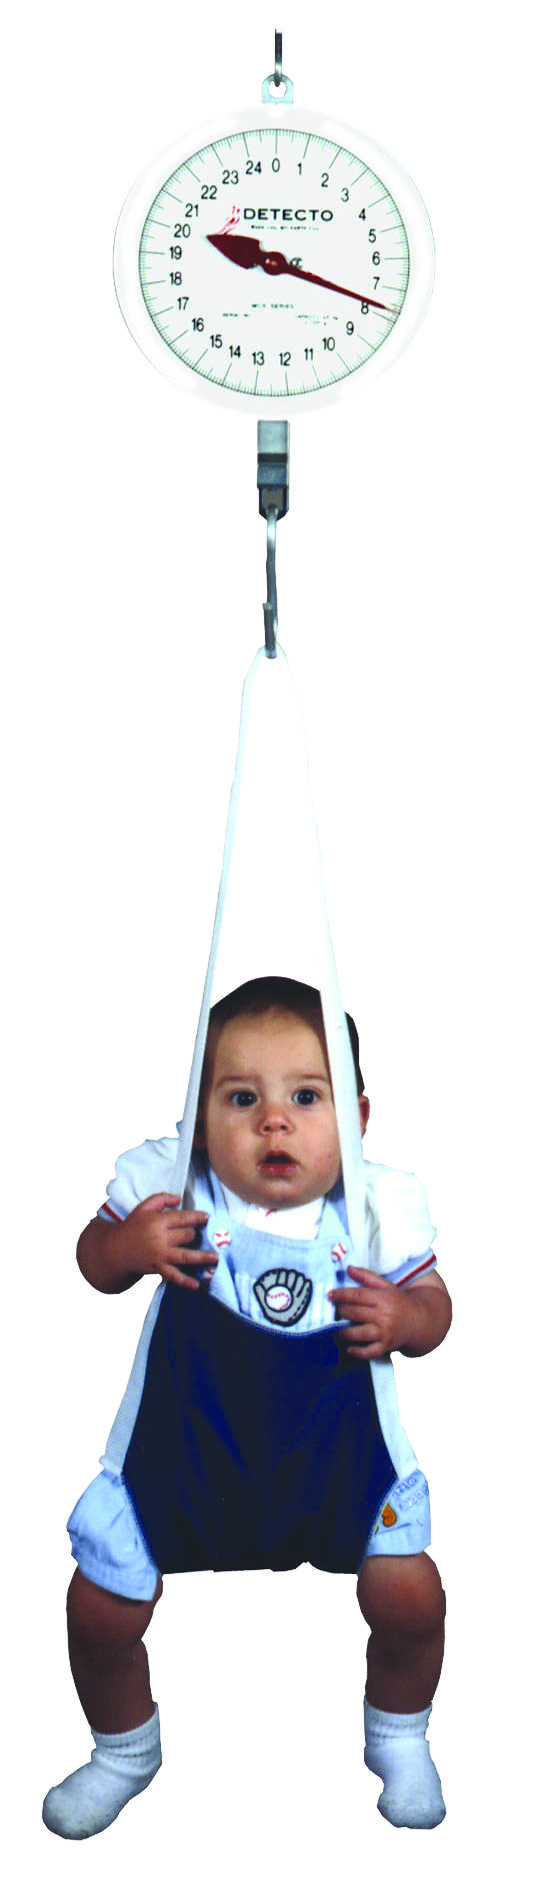 Baby Hanging Weighing Scale